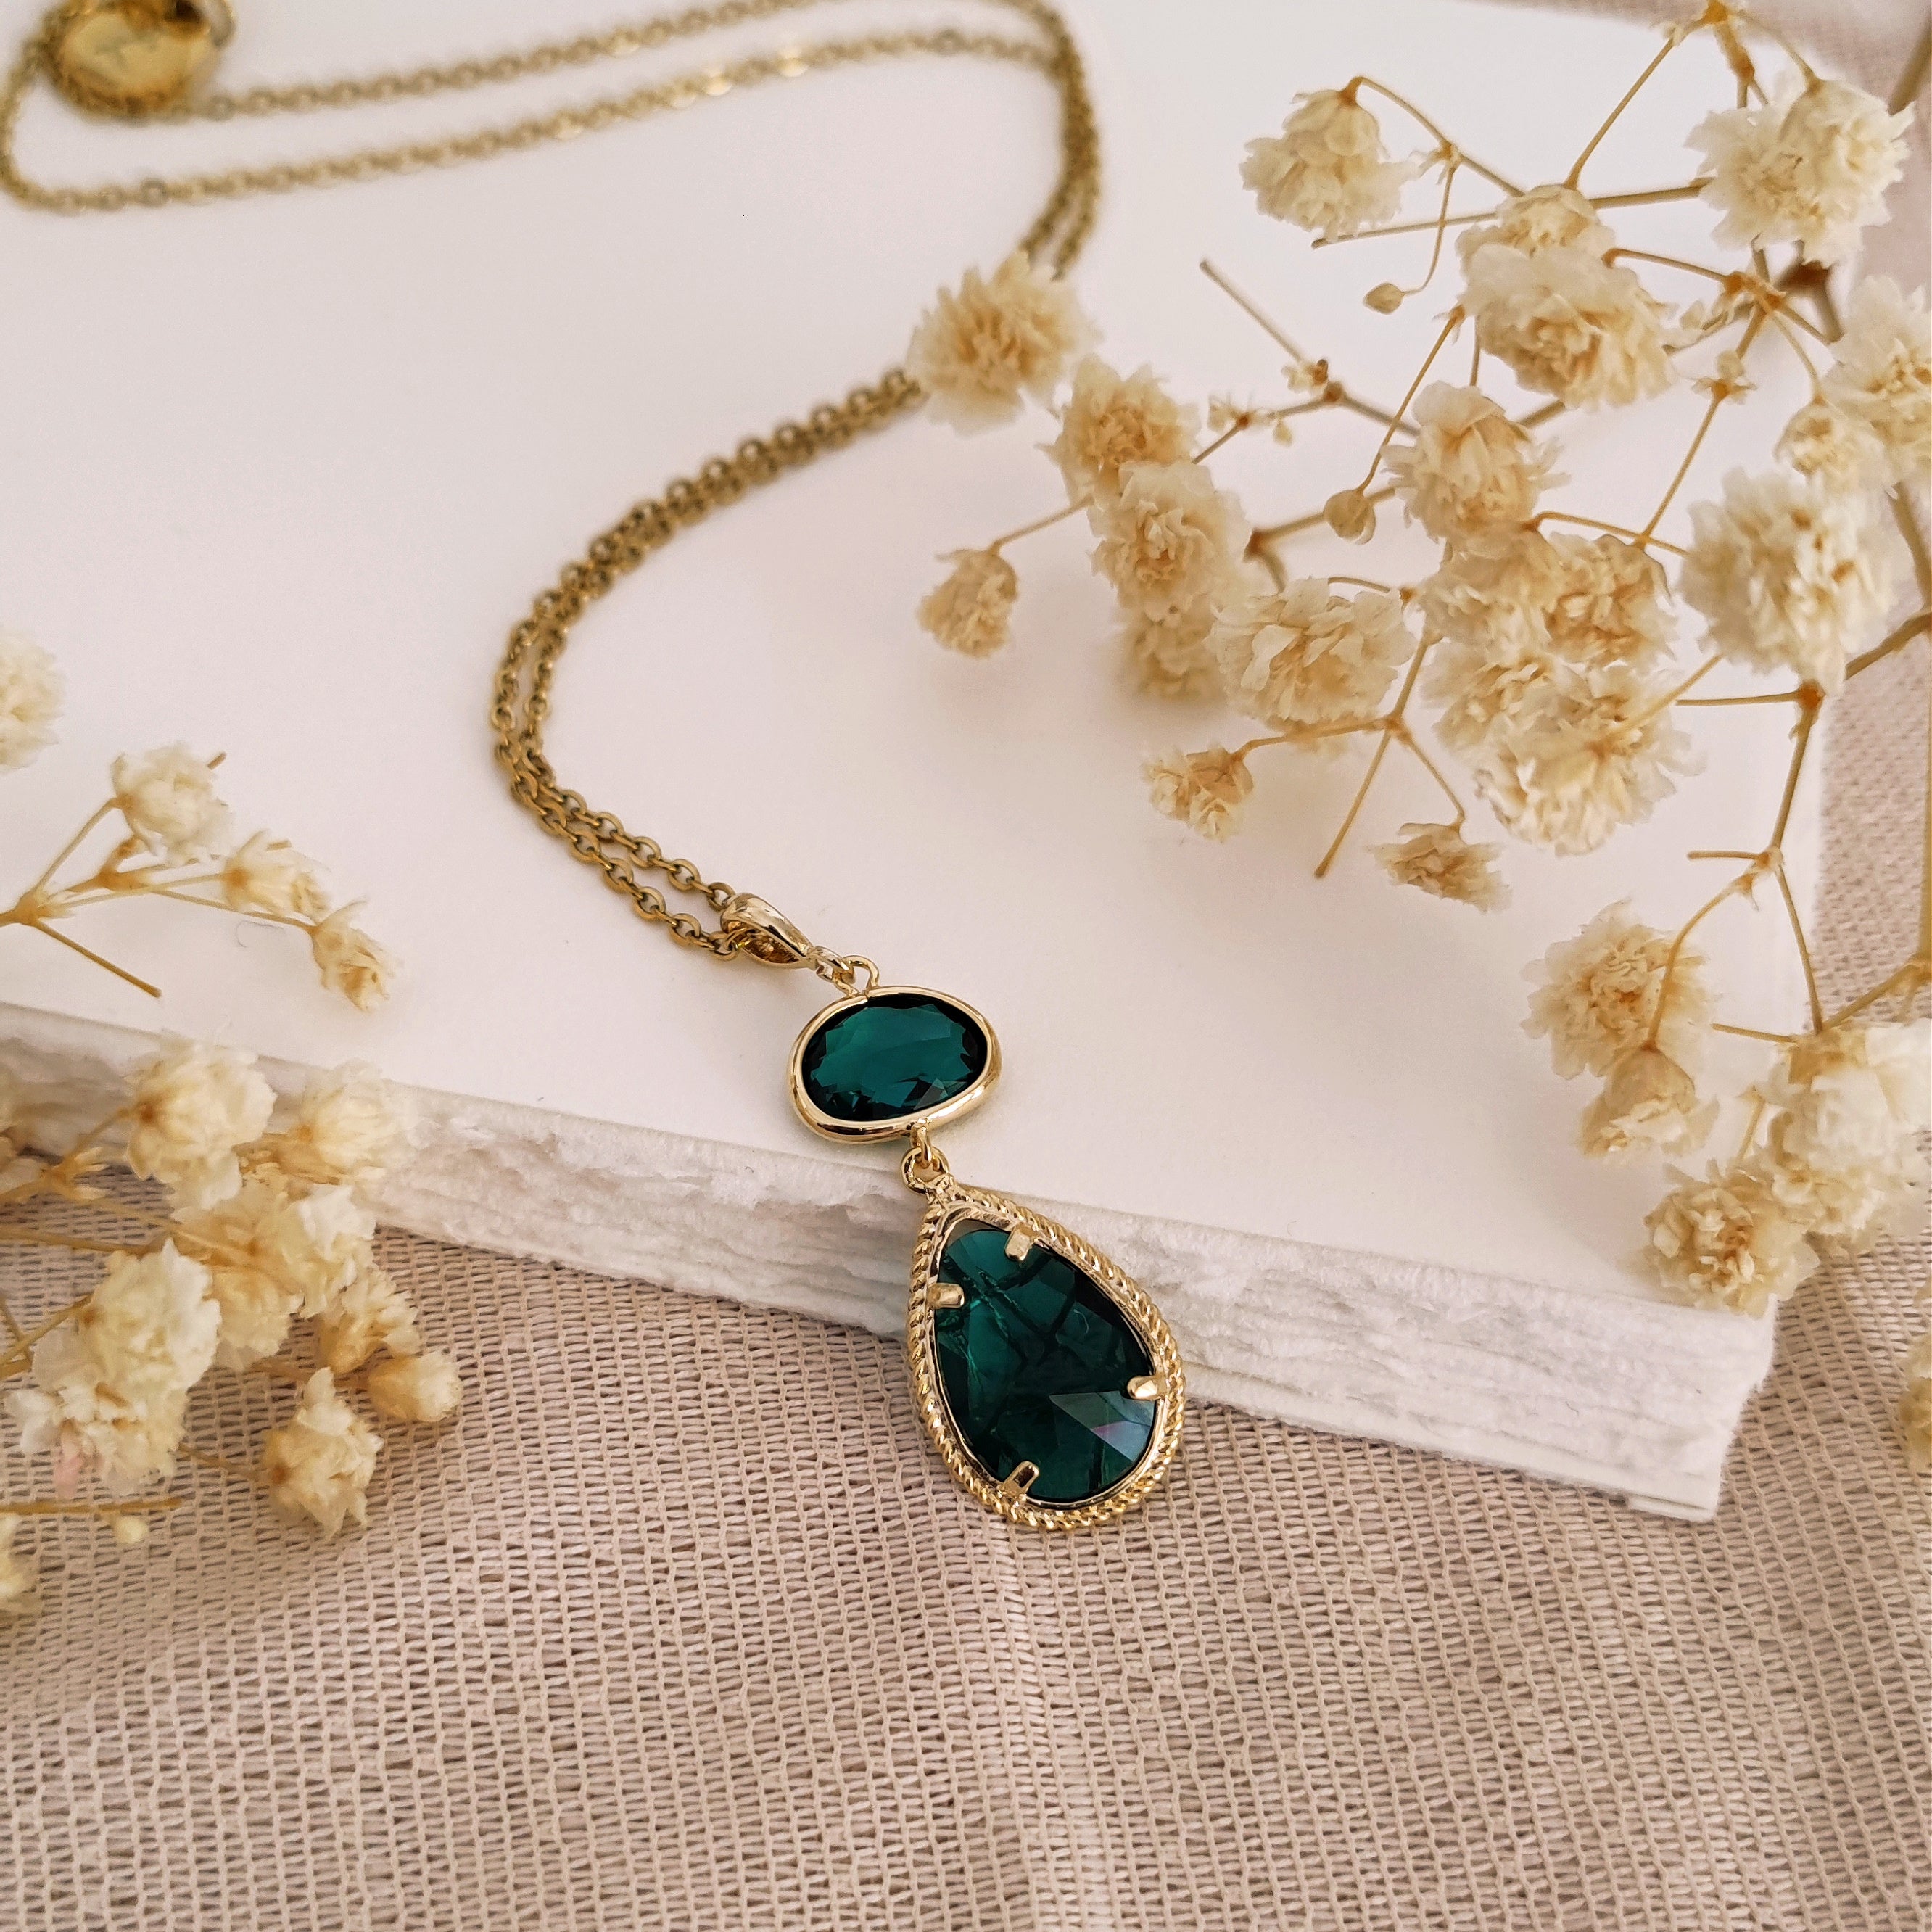 Stylish Emerald Green Antique Gold Necklace Jewellery Set